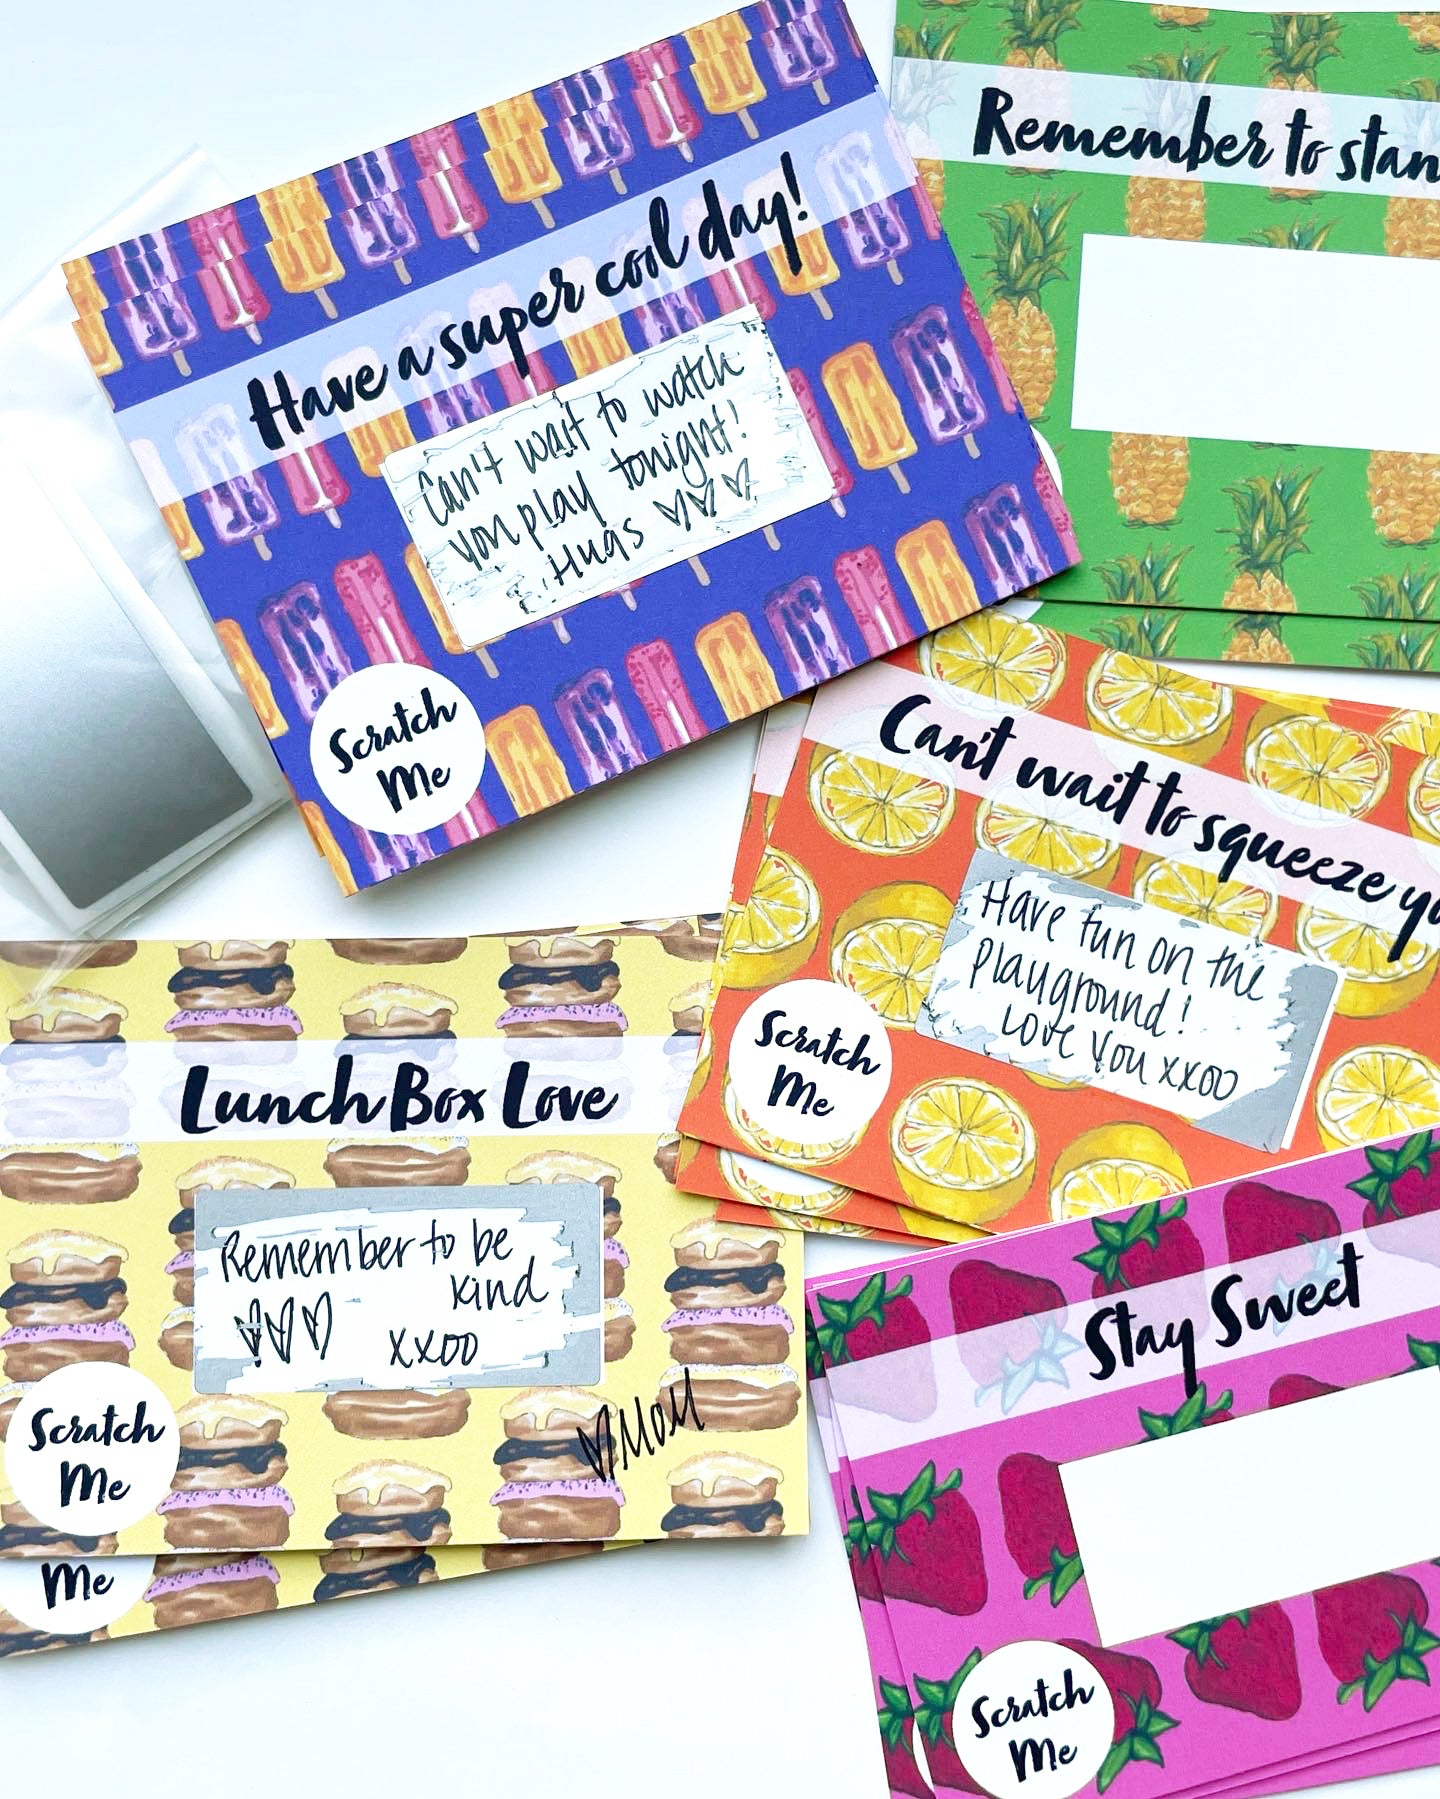 These adorable cards will bring a smile to any child's face! Kids (and grown ups for that matter) love notes in their lunch boxes. This set of 25 cards is very unique and really adds so much fun to their day! 